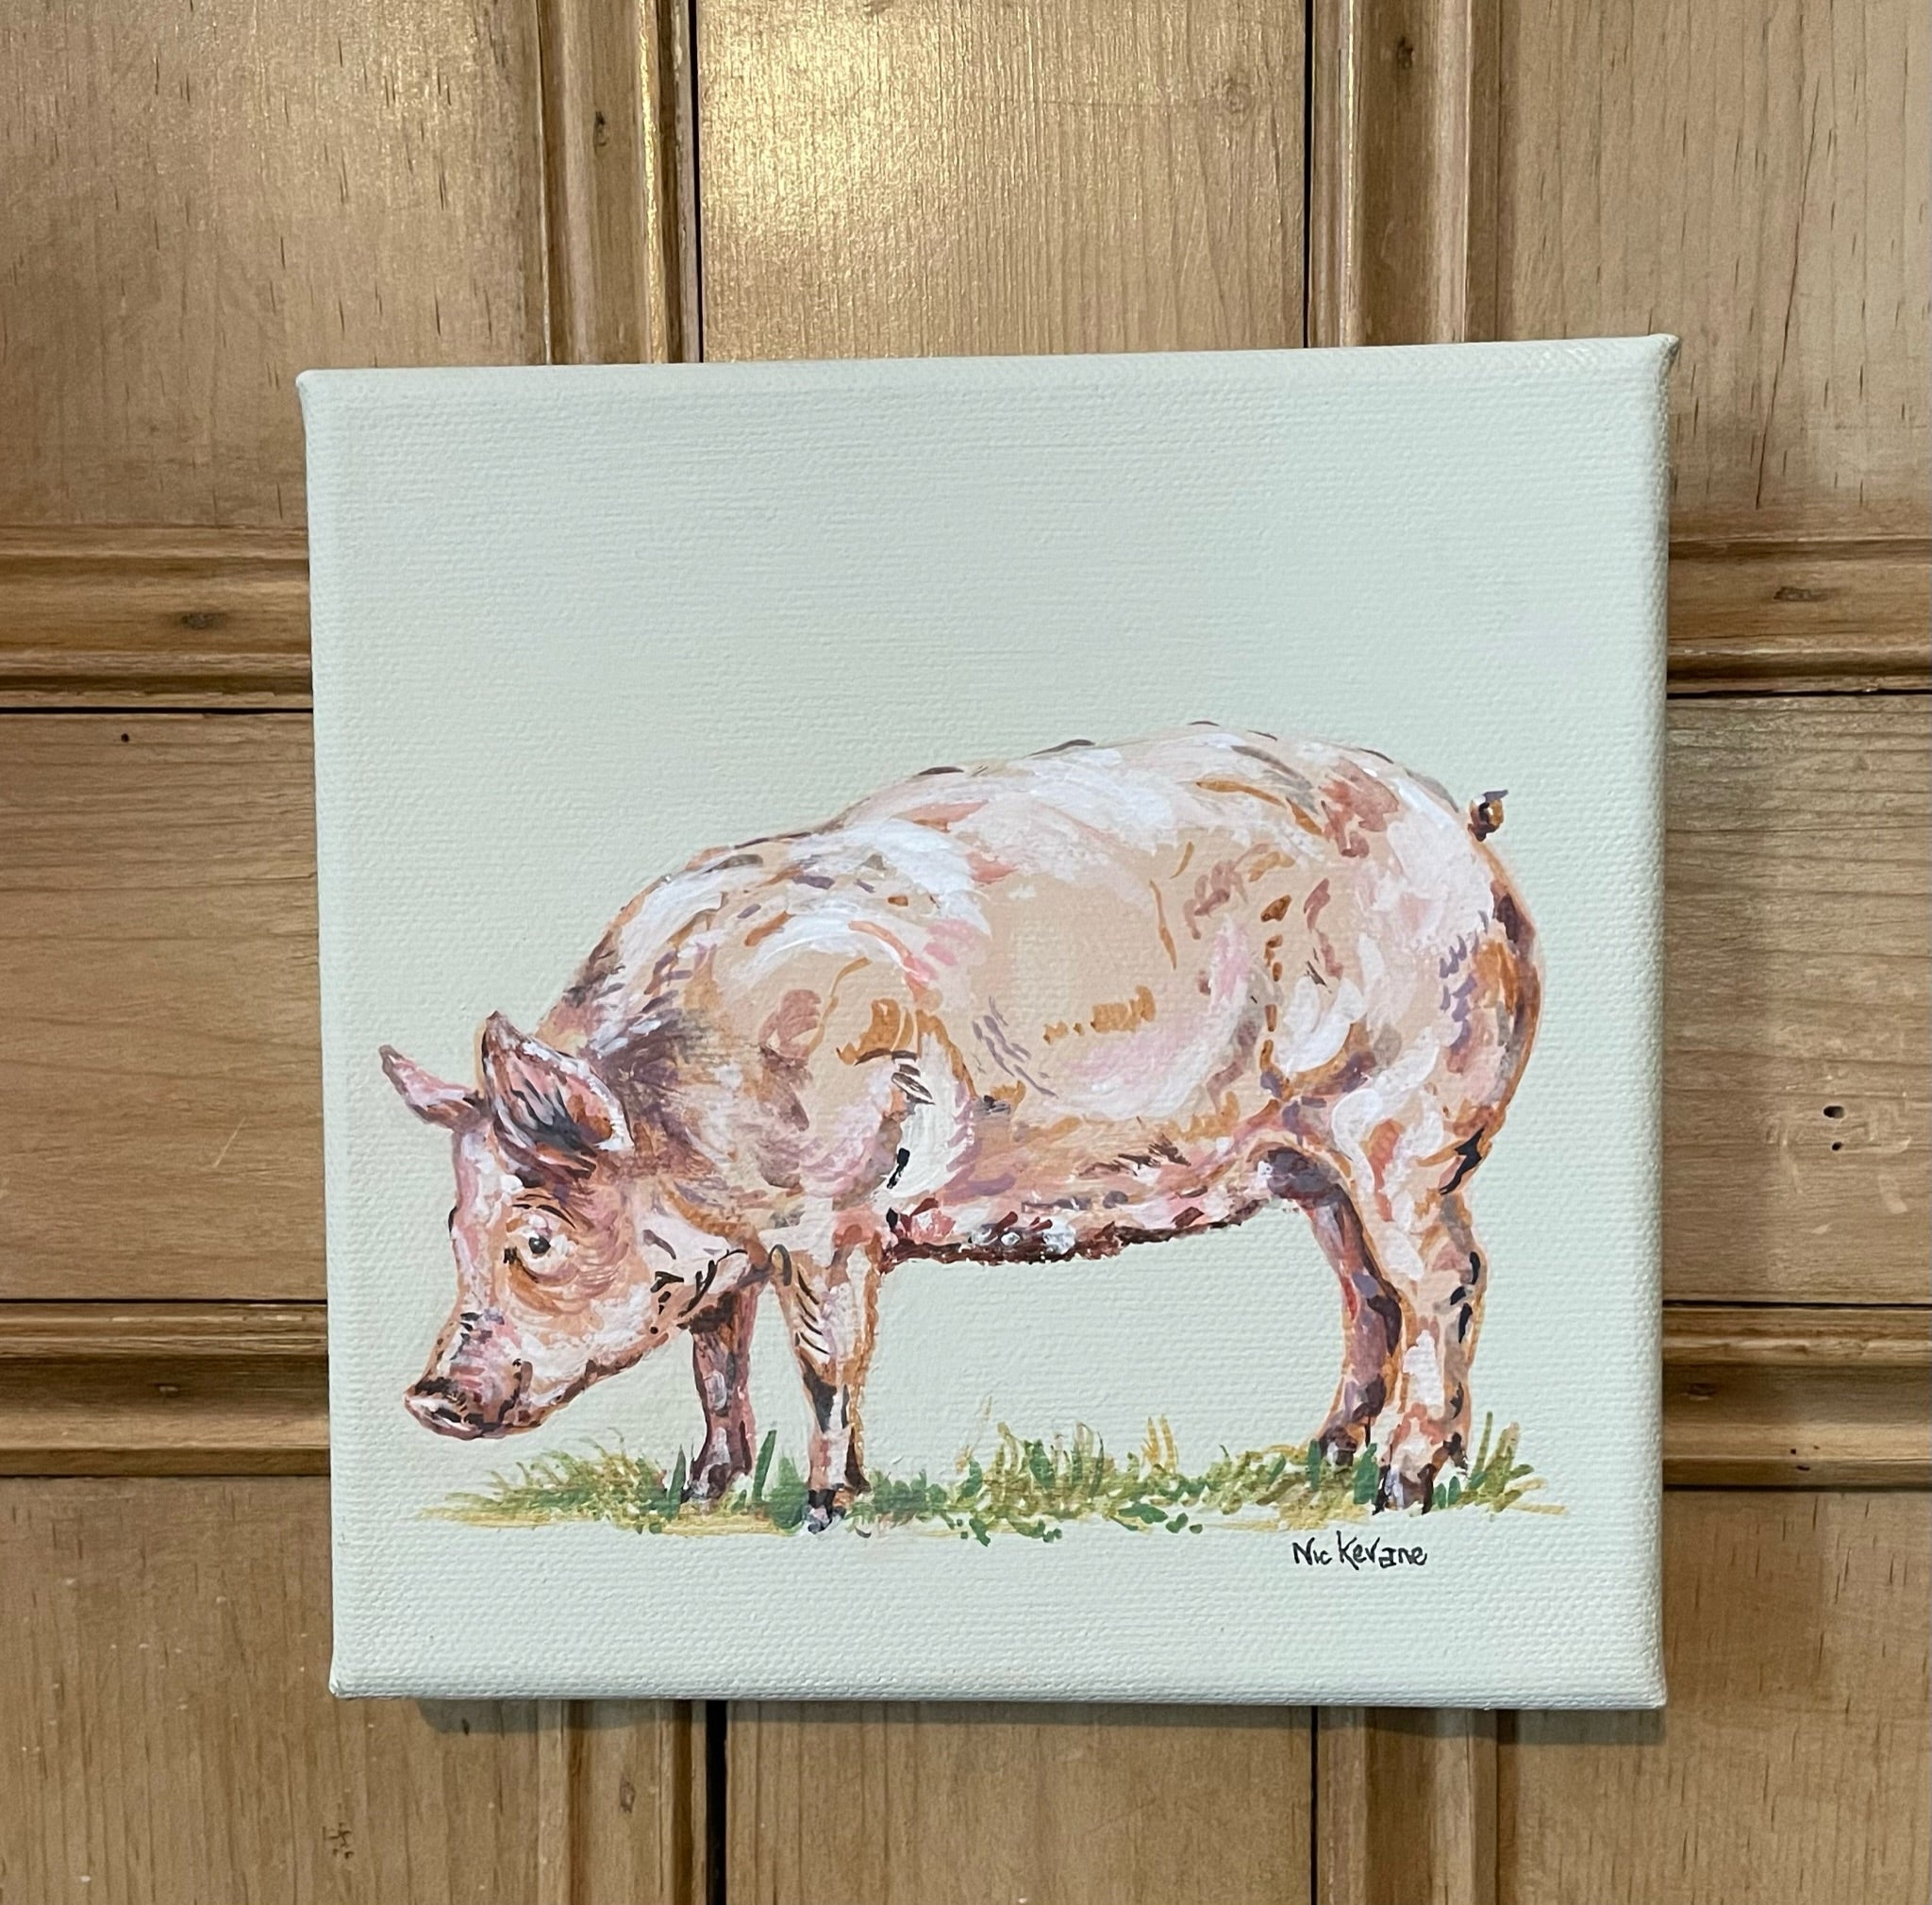 Happy Pig - My mini paintings depict various countryside subjects painted on soft off-white backgrounds.